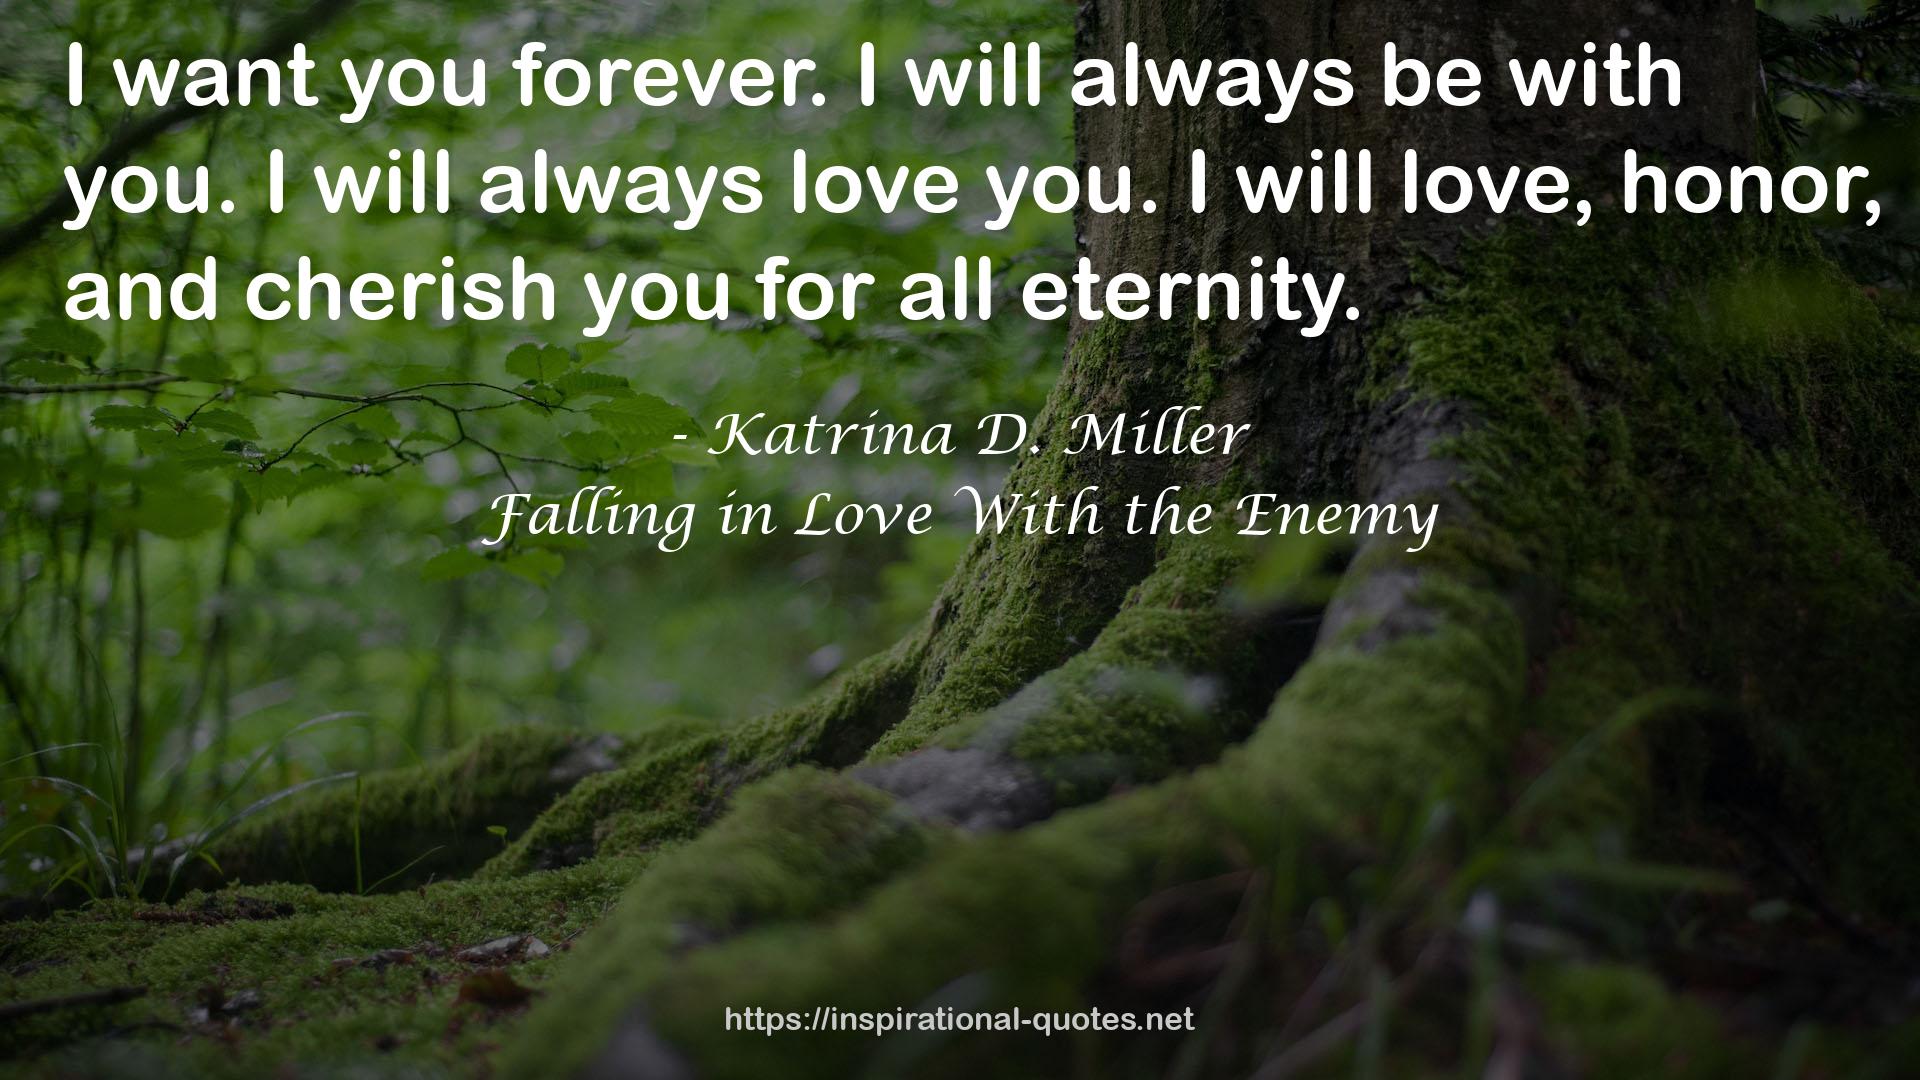 Falling in Love With the Enemy QUOTES